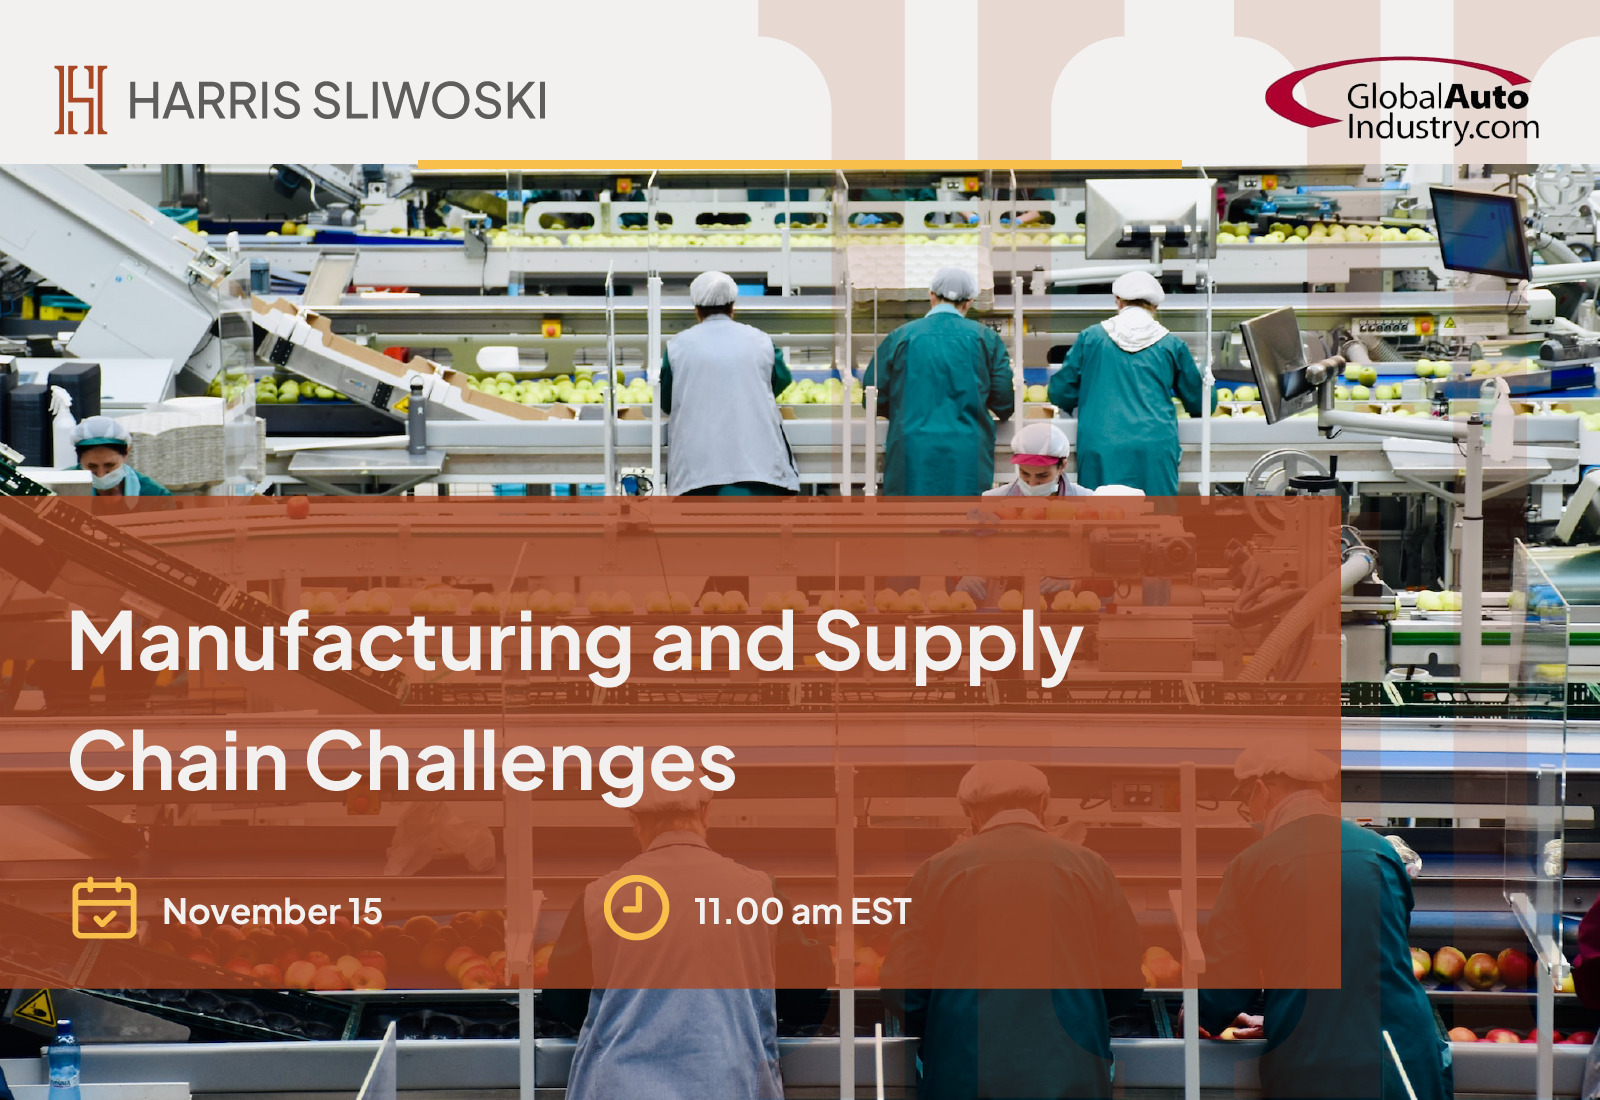 Week 5: Manufacturing and Supply Chain Challenges